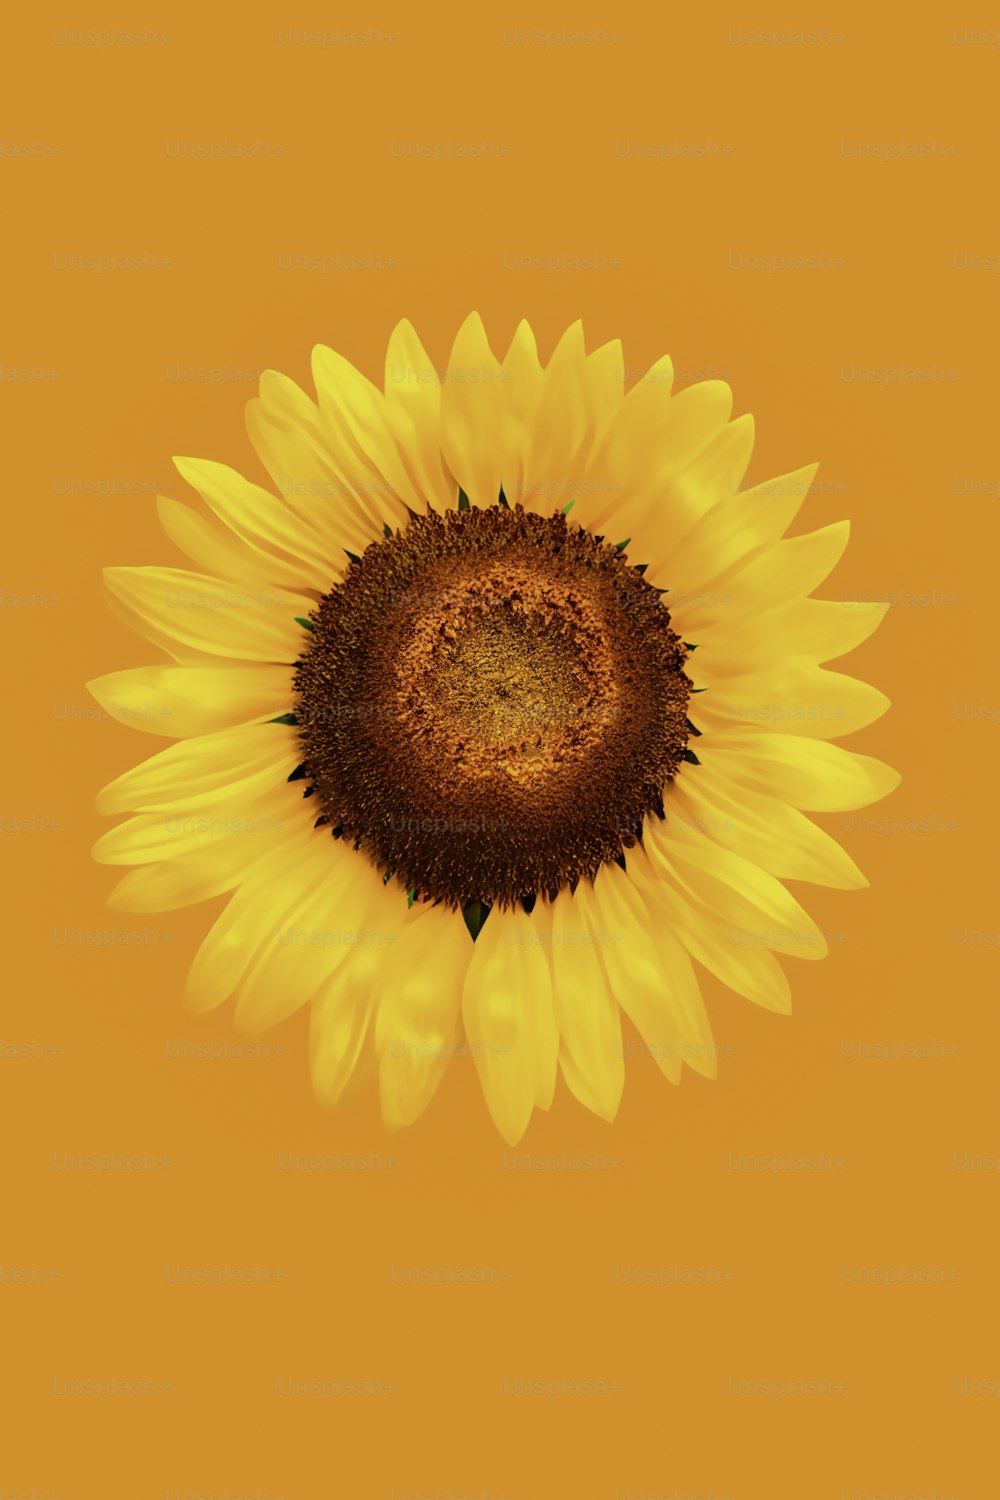 a large yellow sunflower on a yellow background